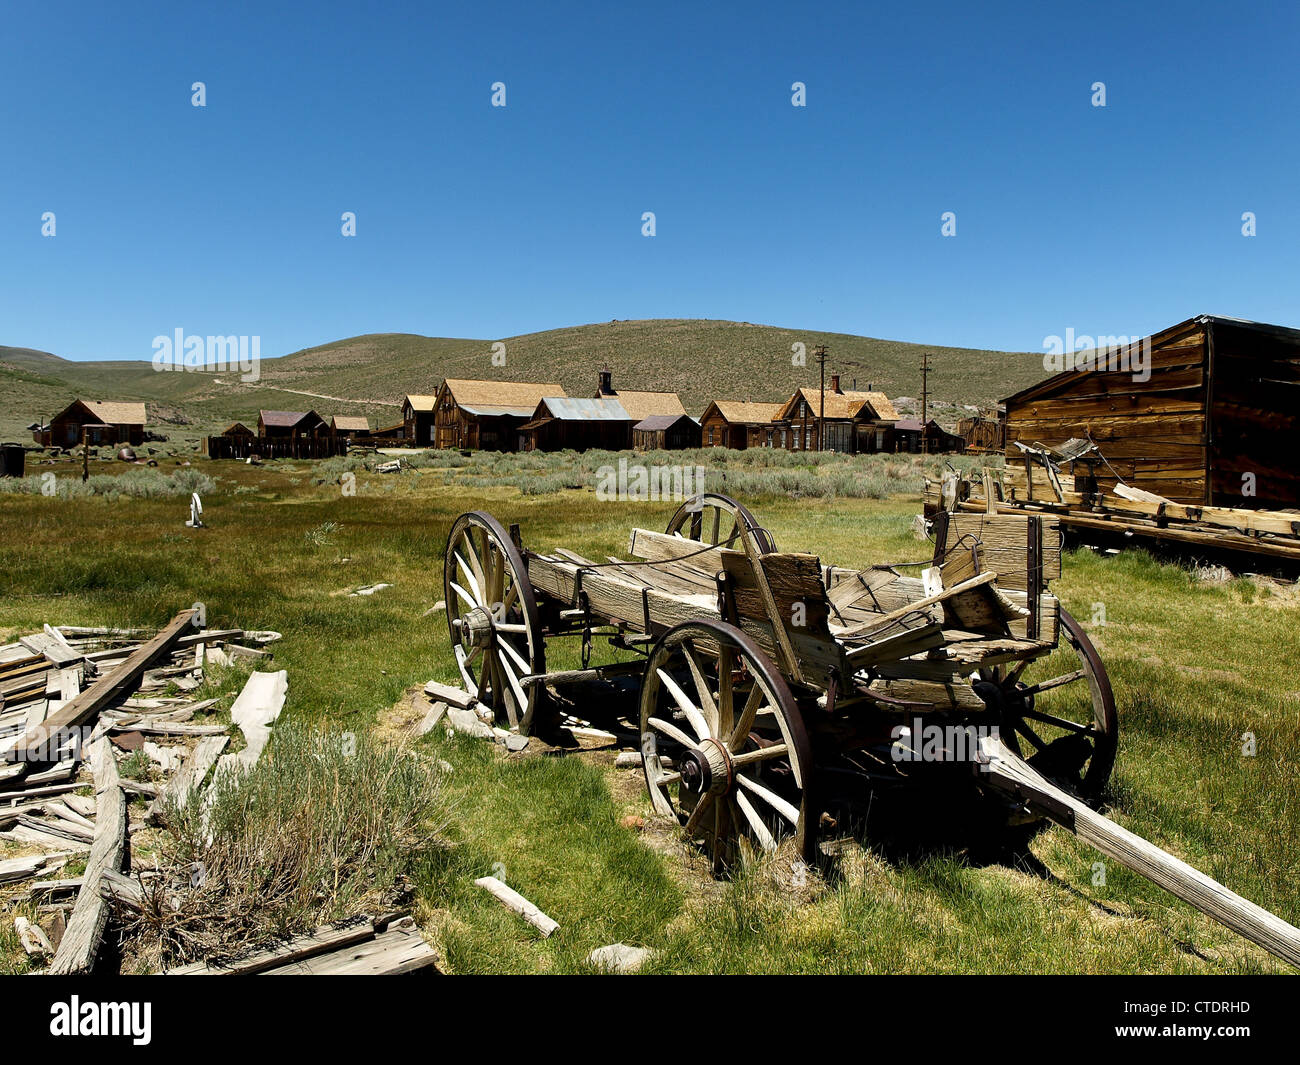 A old horse-car in Bodie, a ghost town in California, United States. Stock Photo